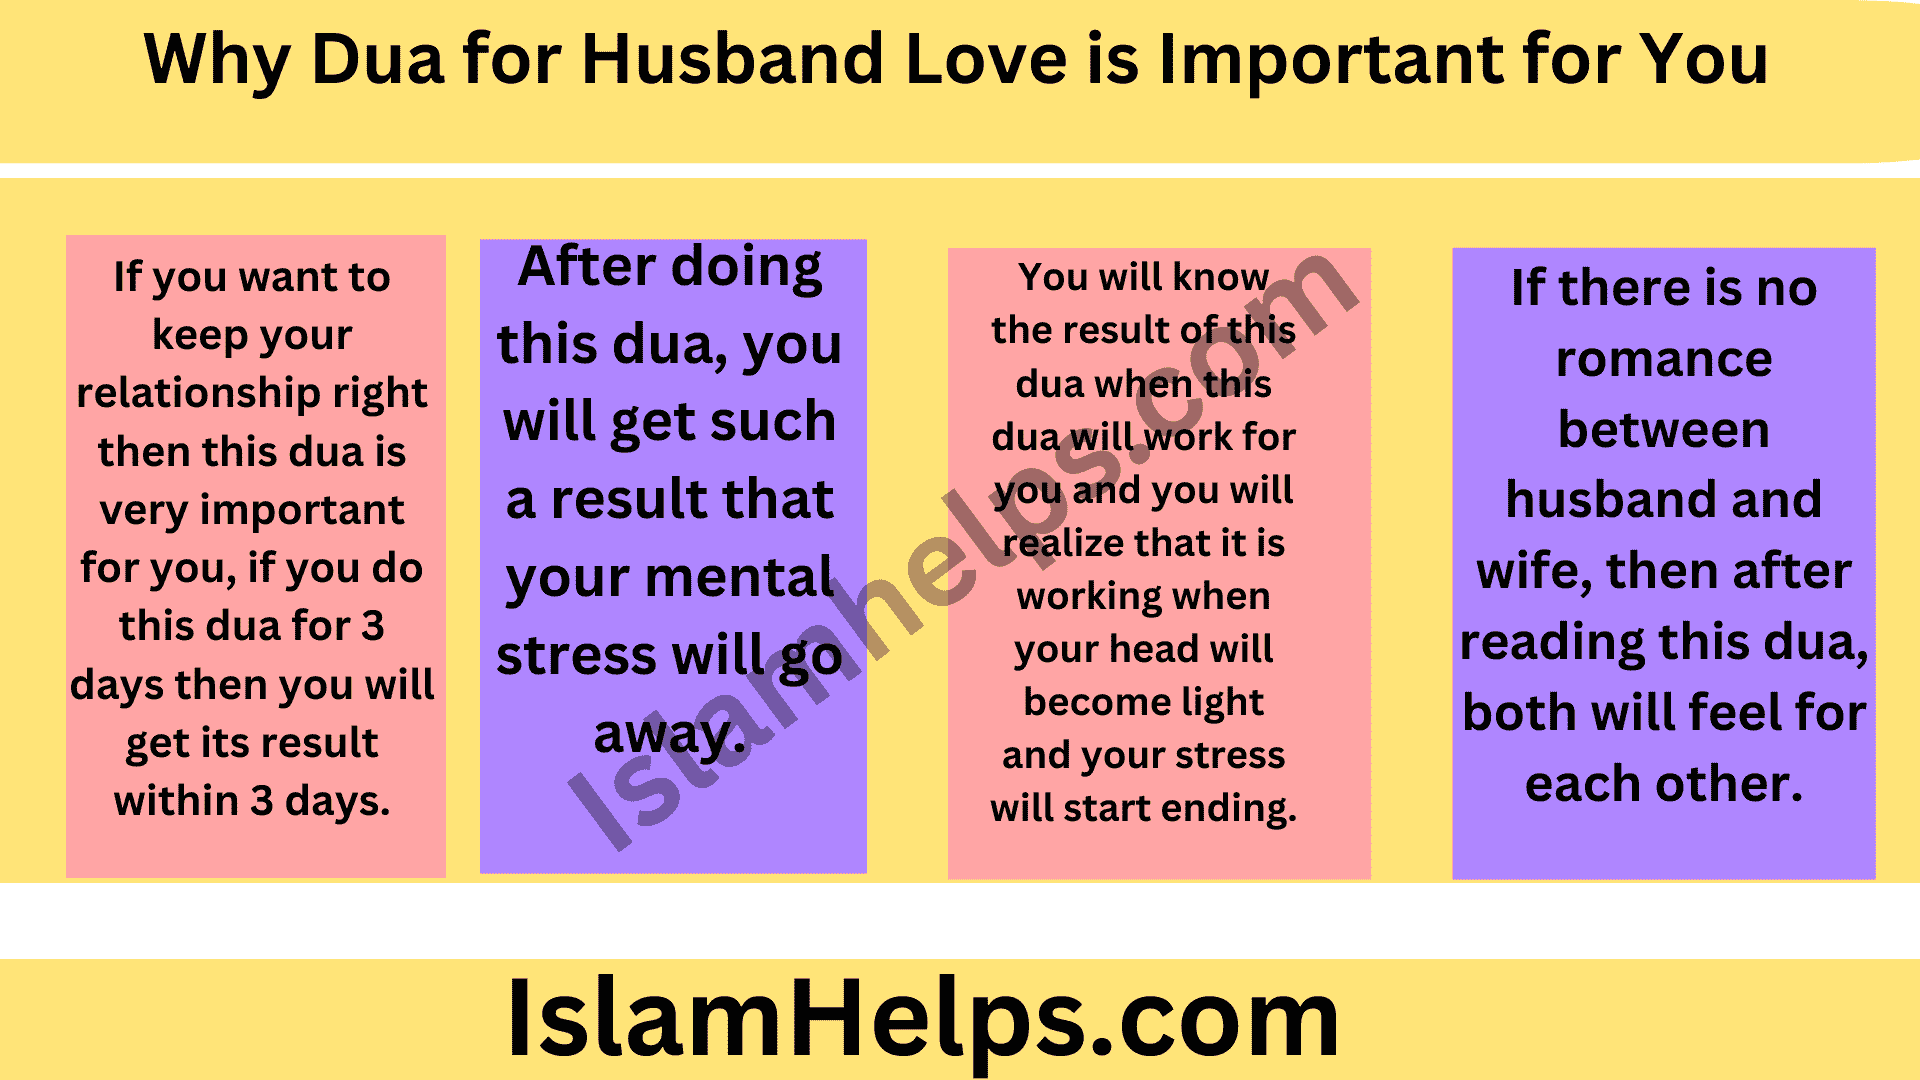 Why Dua for Husband Love is Important for You